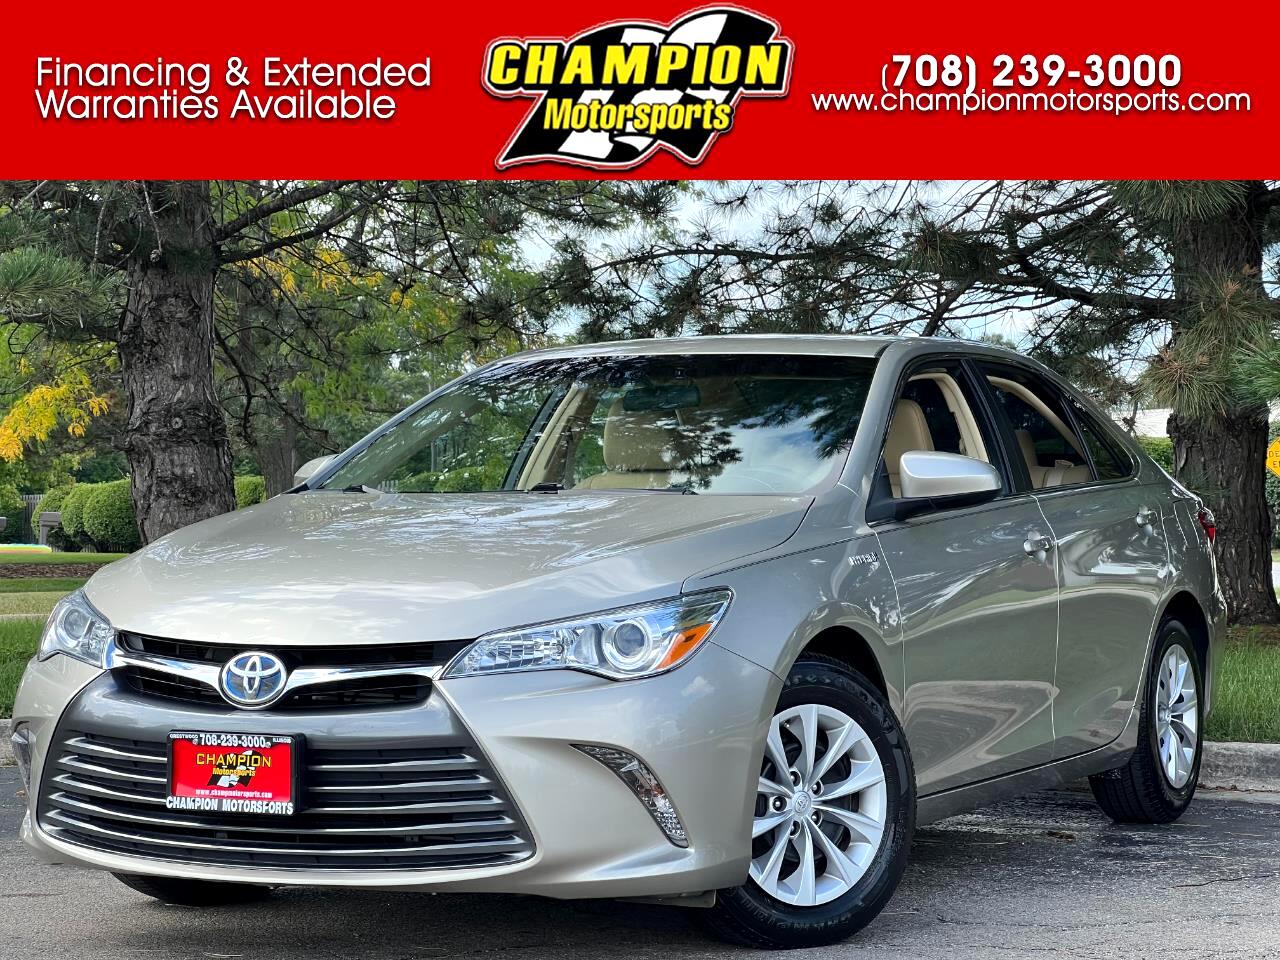 2015 Toyota Camry Hybrid 4dr Sdn LE (Natl)